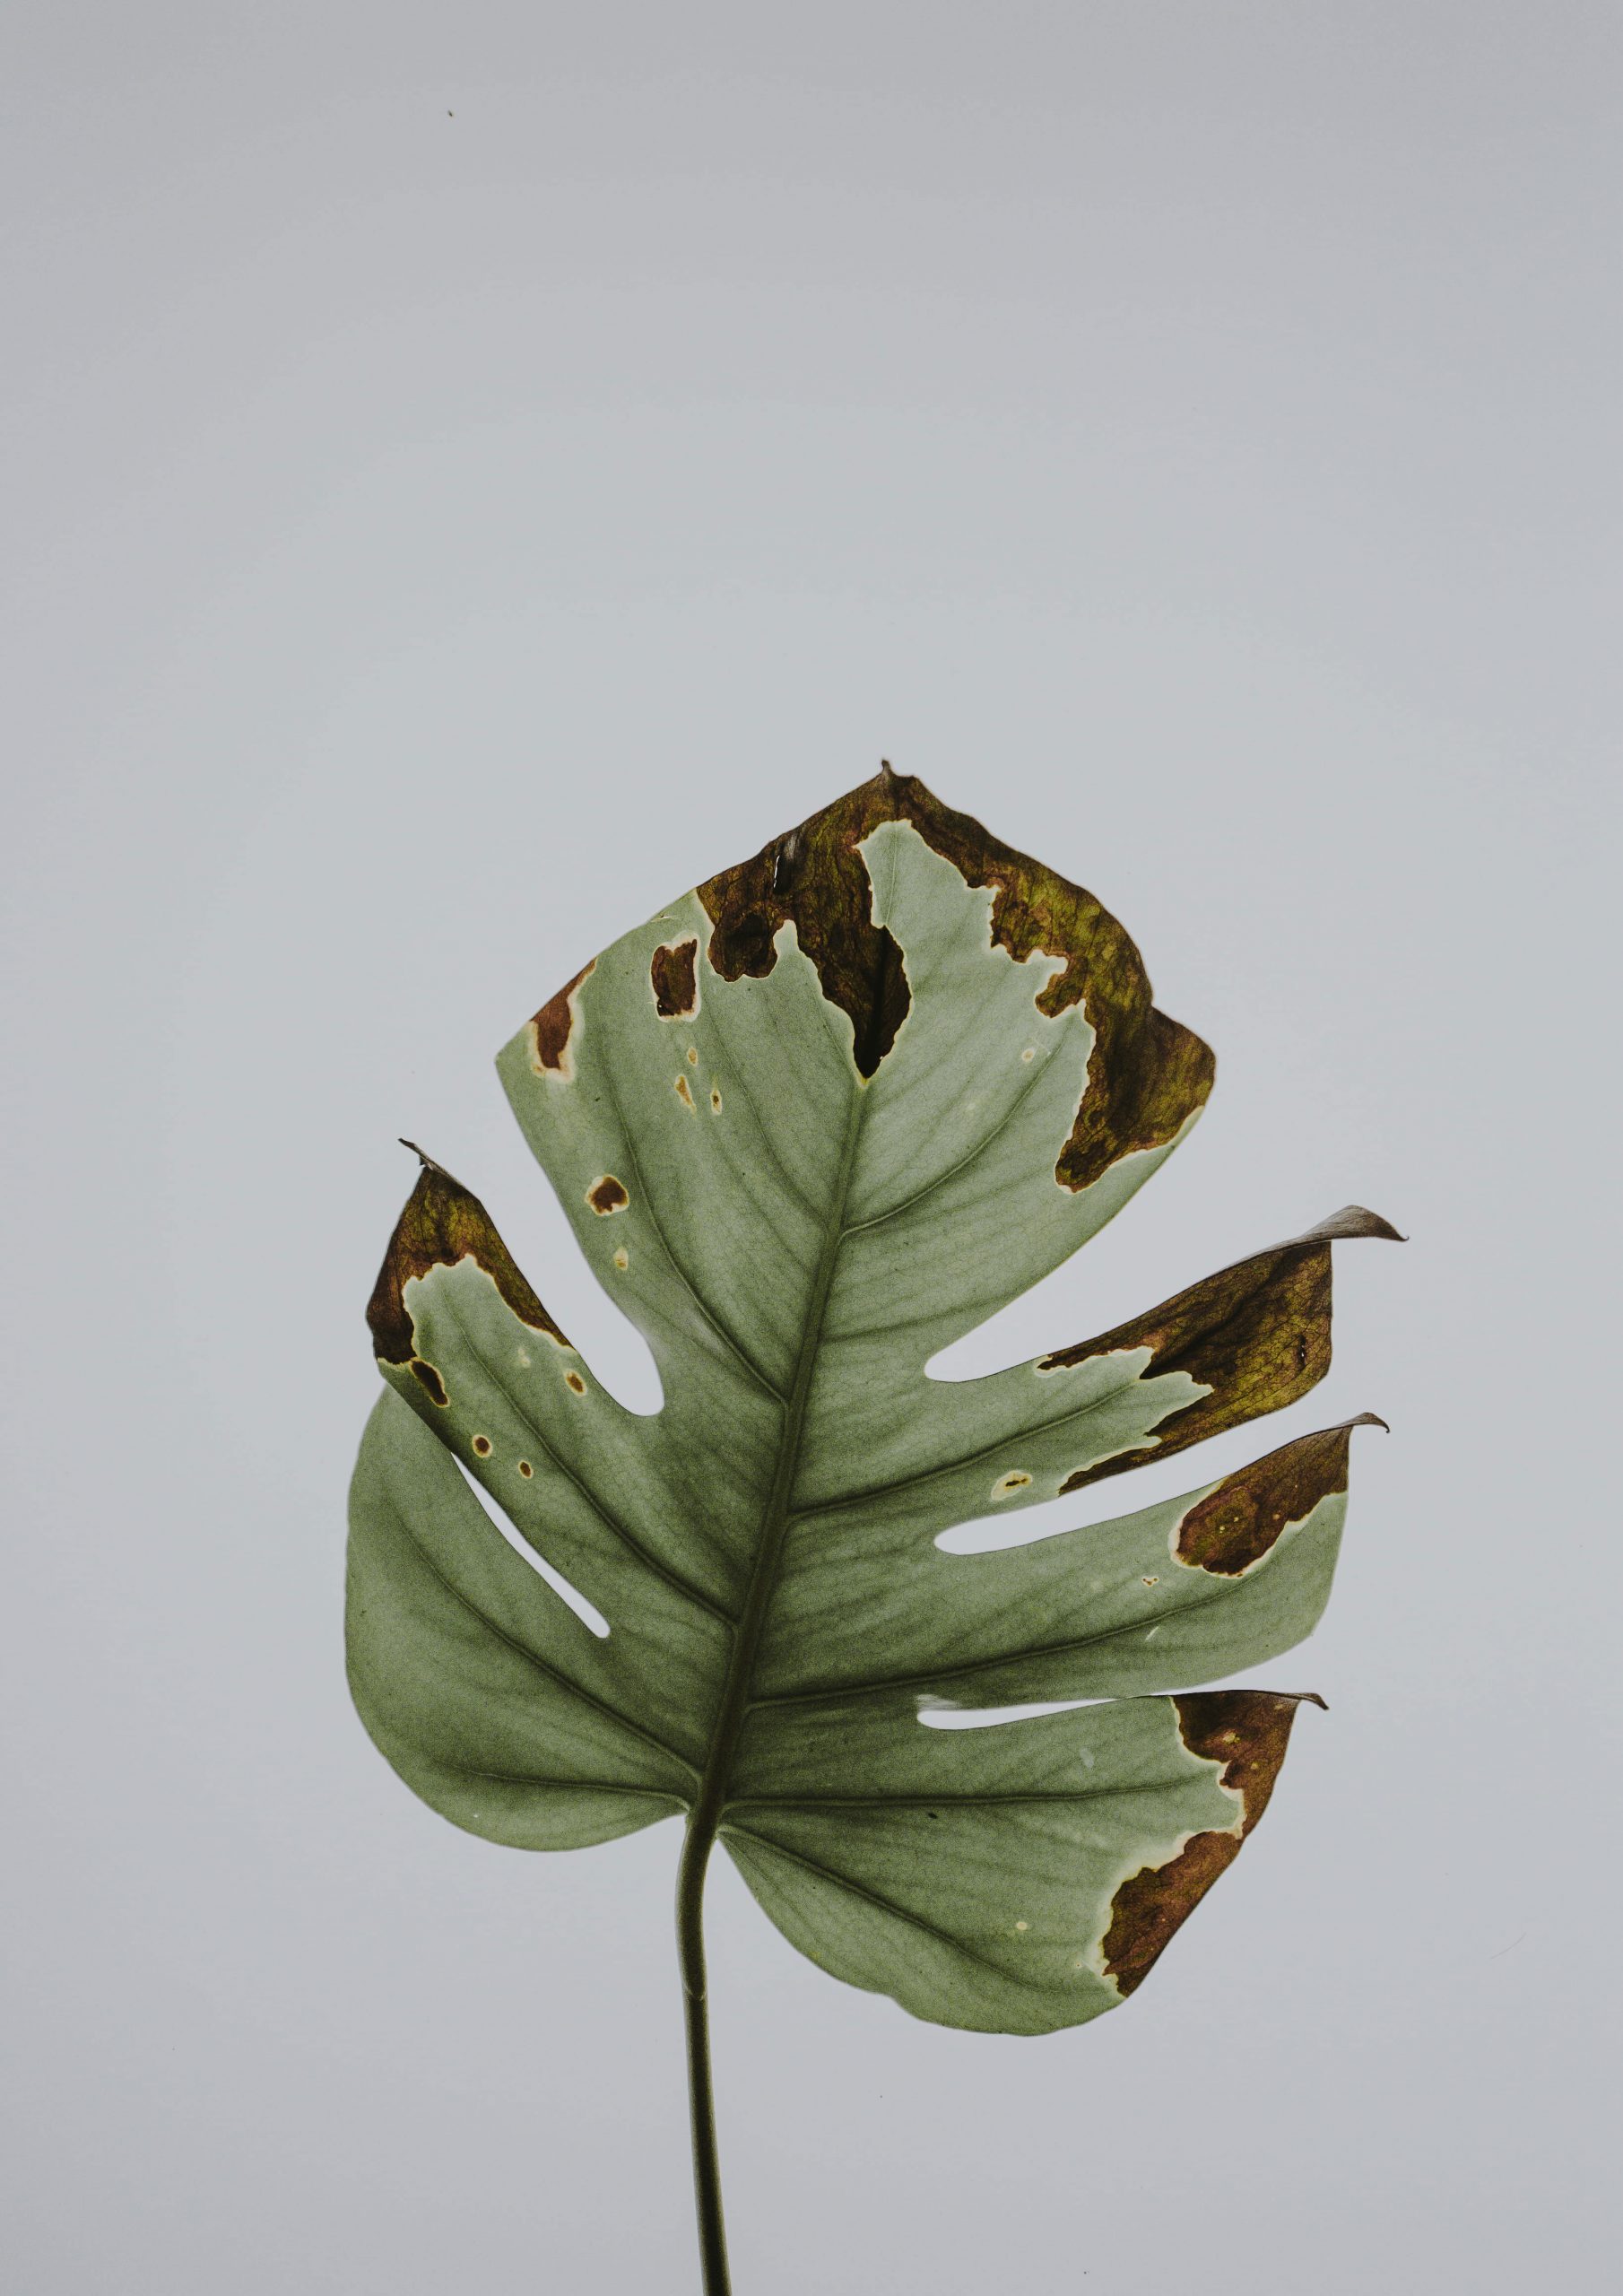 Wallpaper Photo Of Green Leaf, Withered Green Philodendron